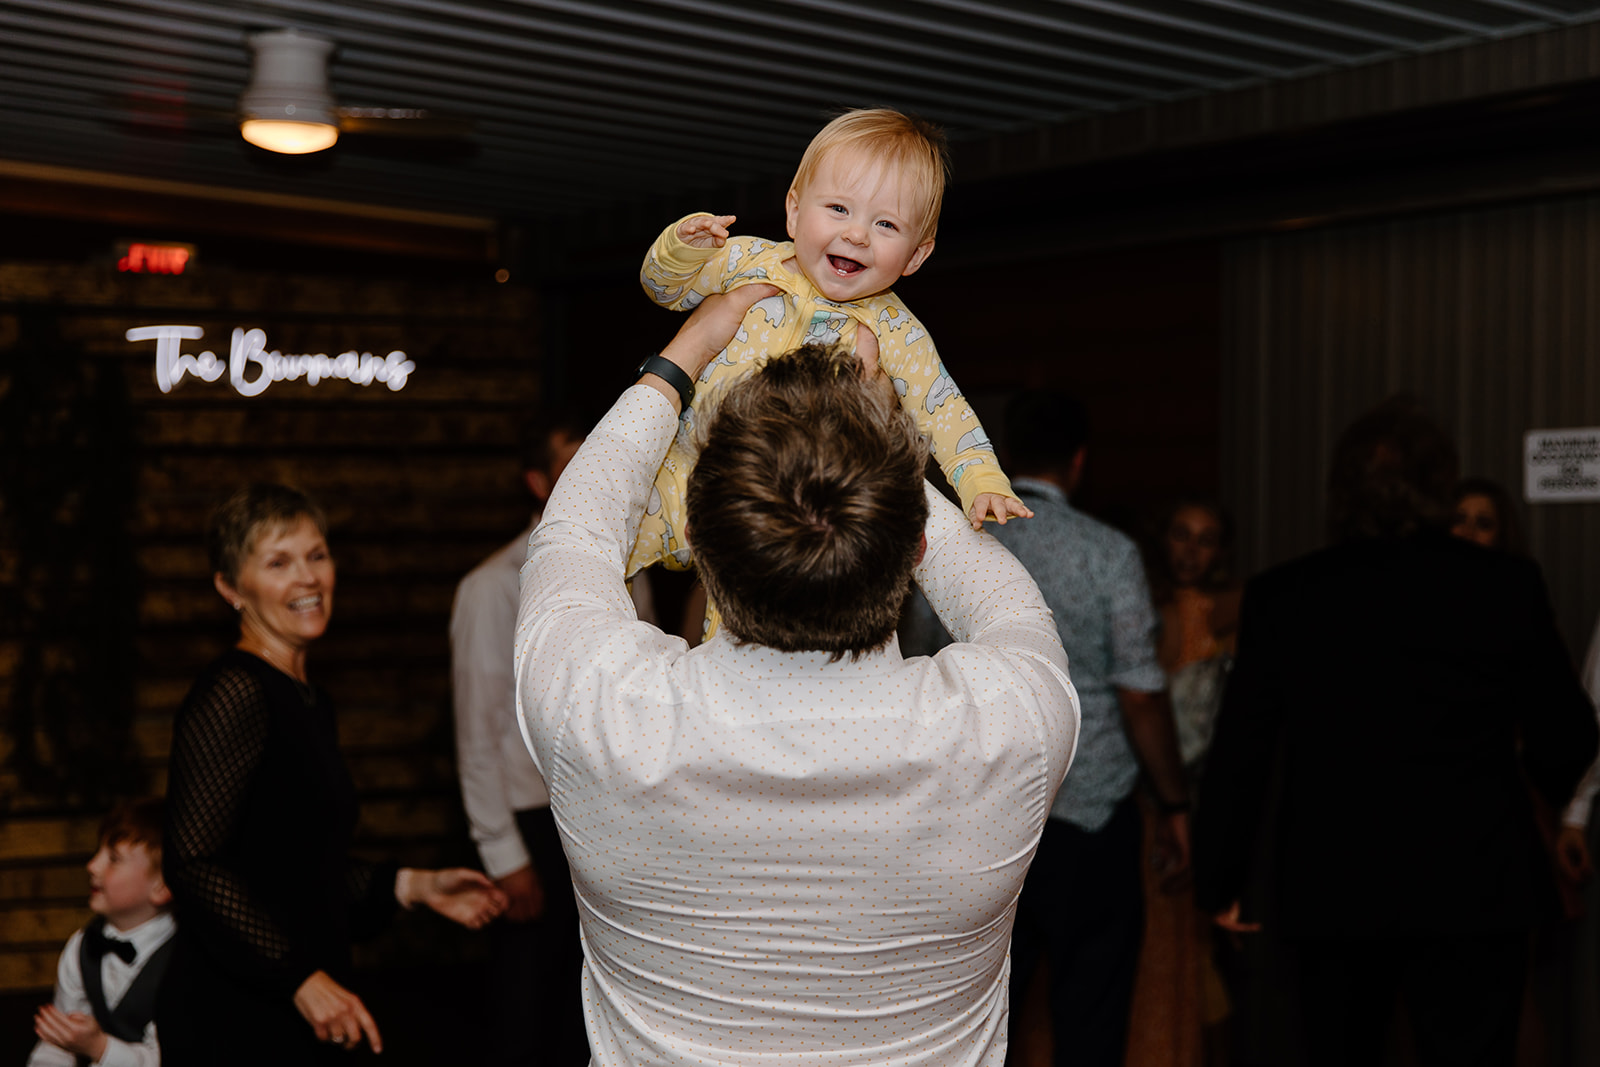 Baby is thrown into the air